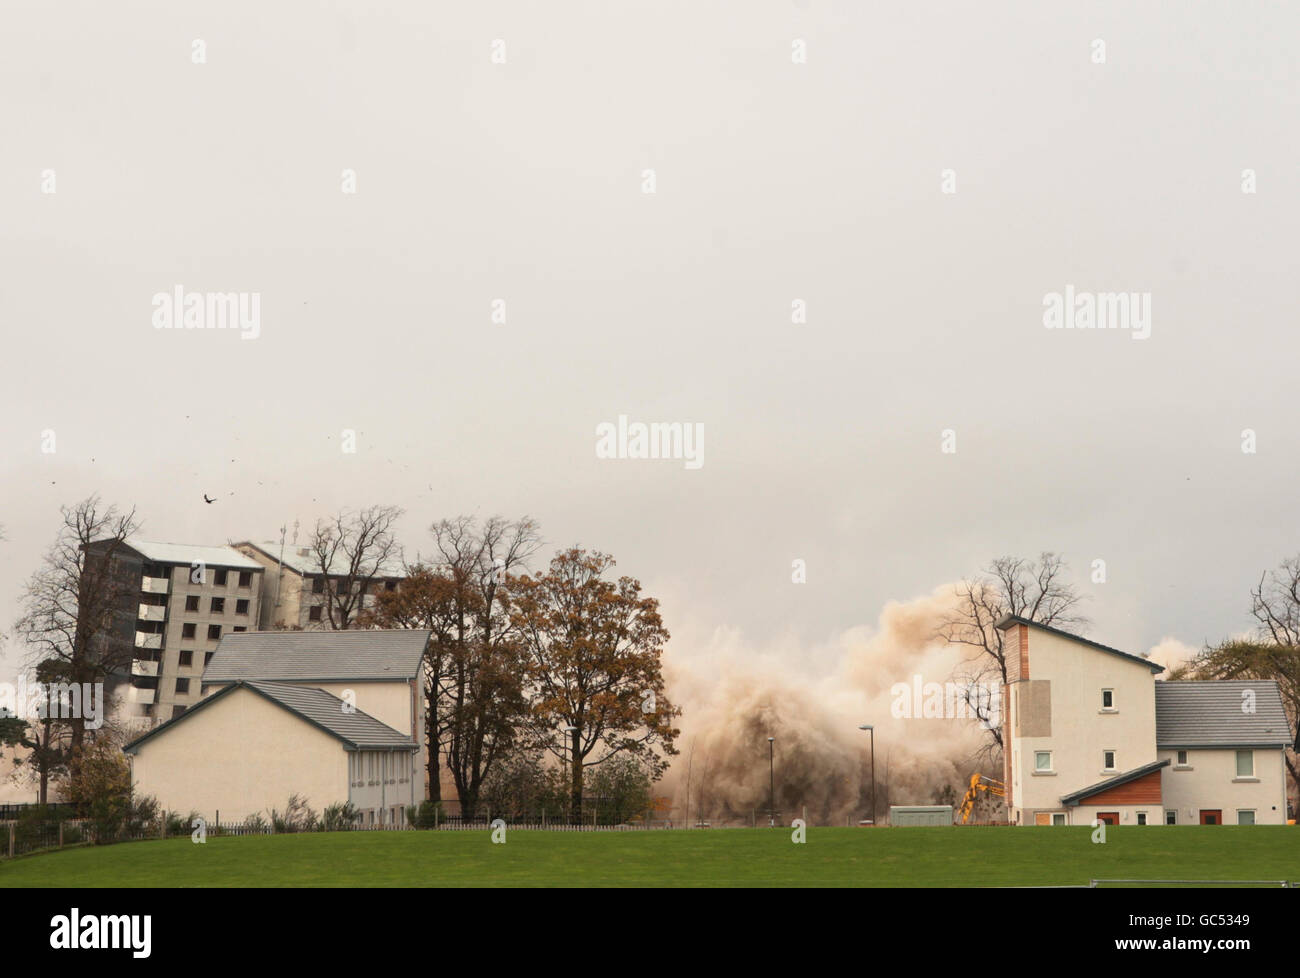 Three high-rise flats are demolished using controlled explosives on Lasswade road in Edinburgh. Stock Photo